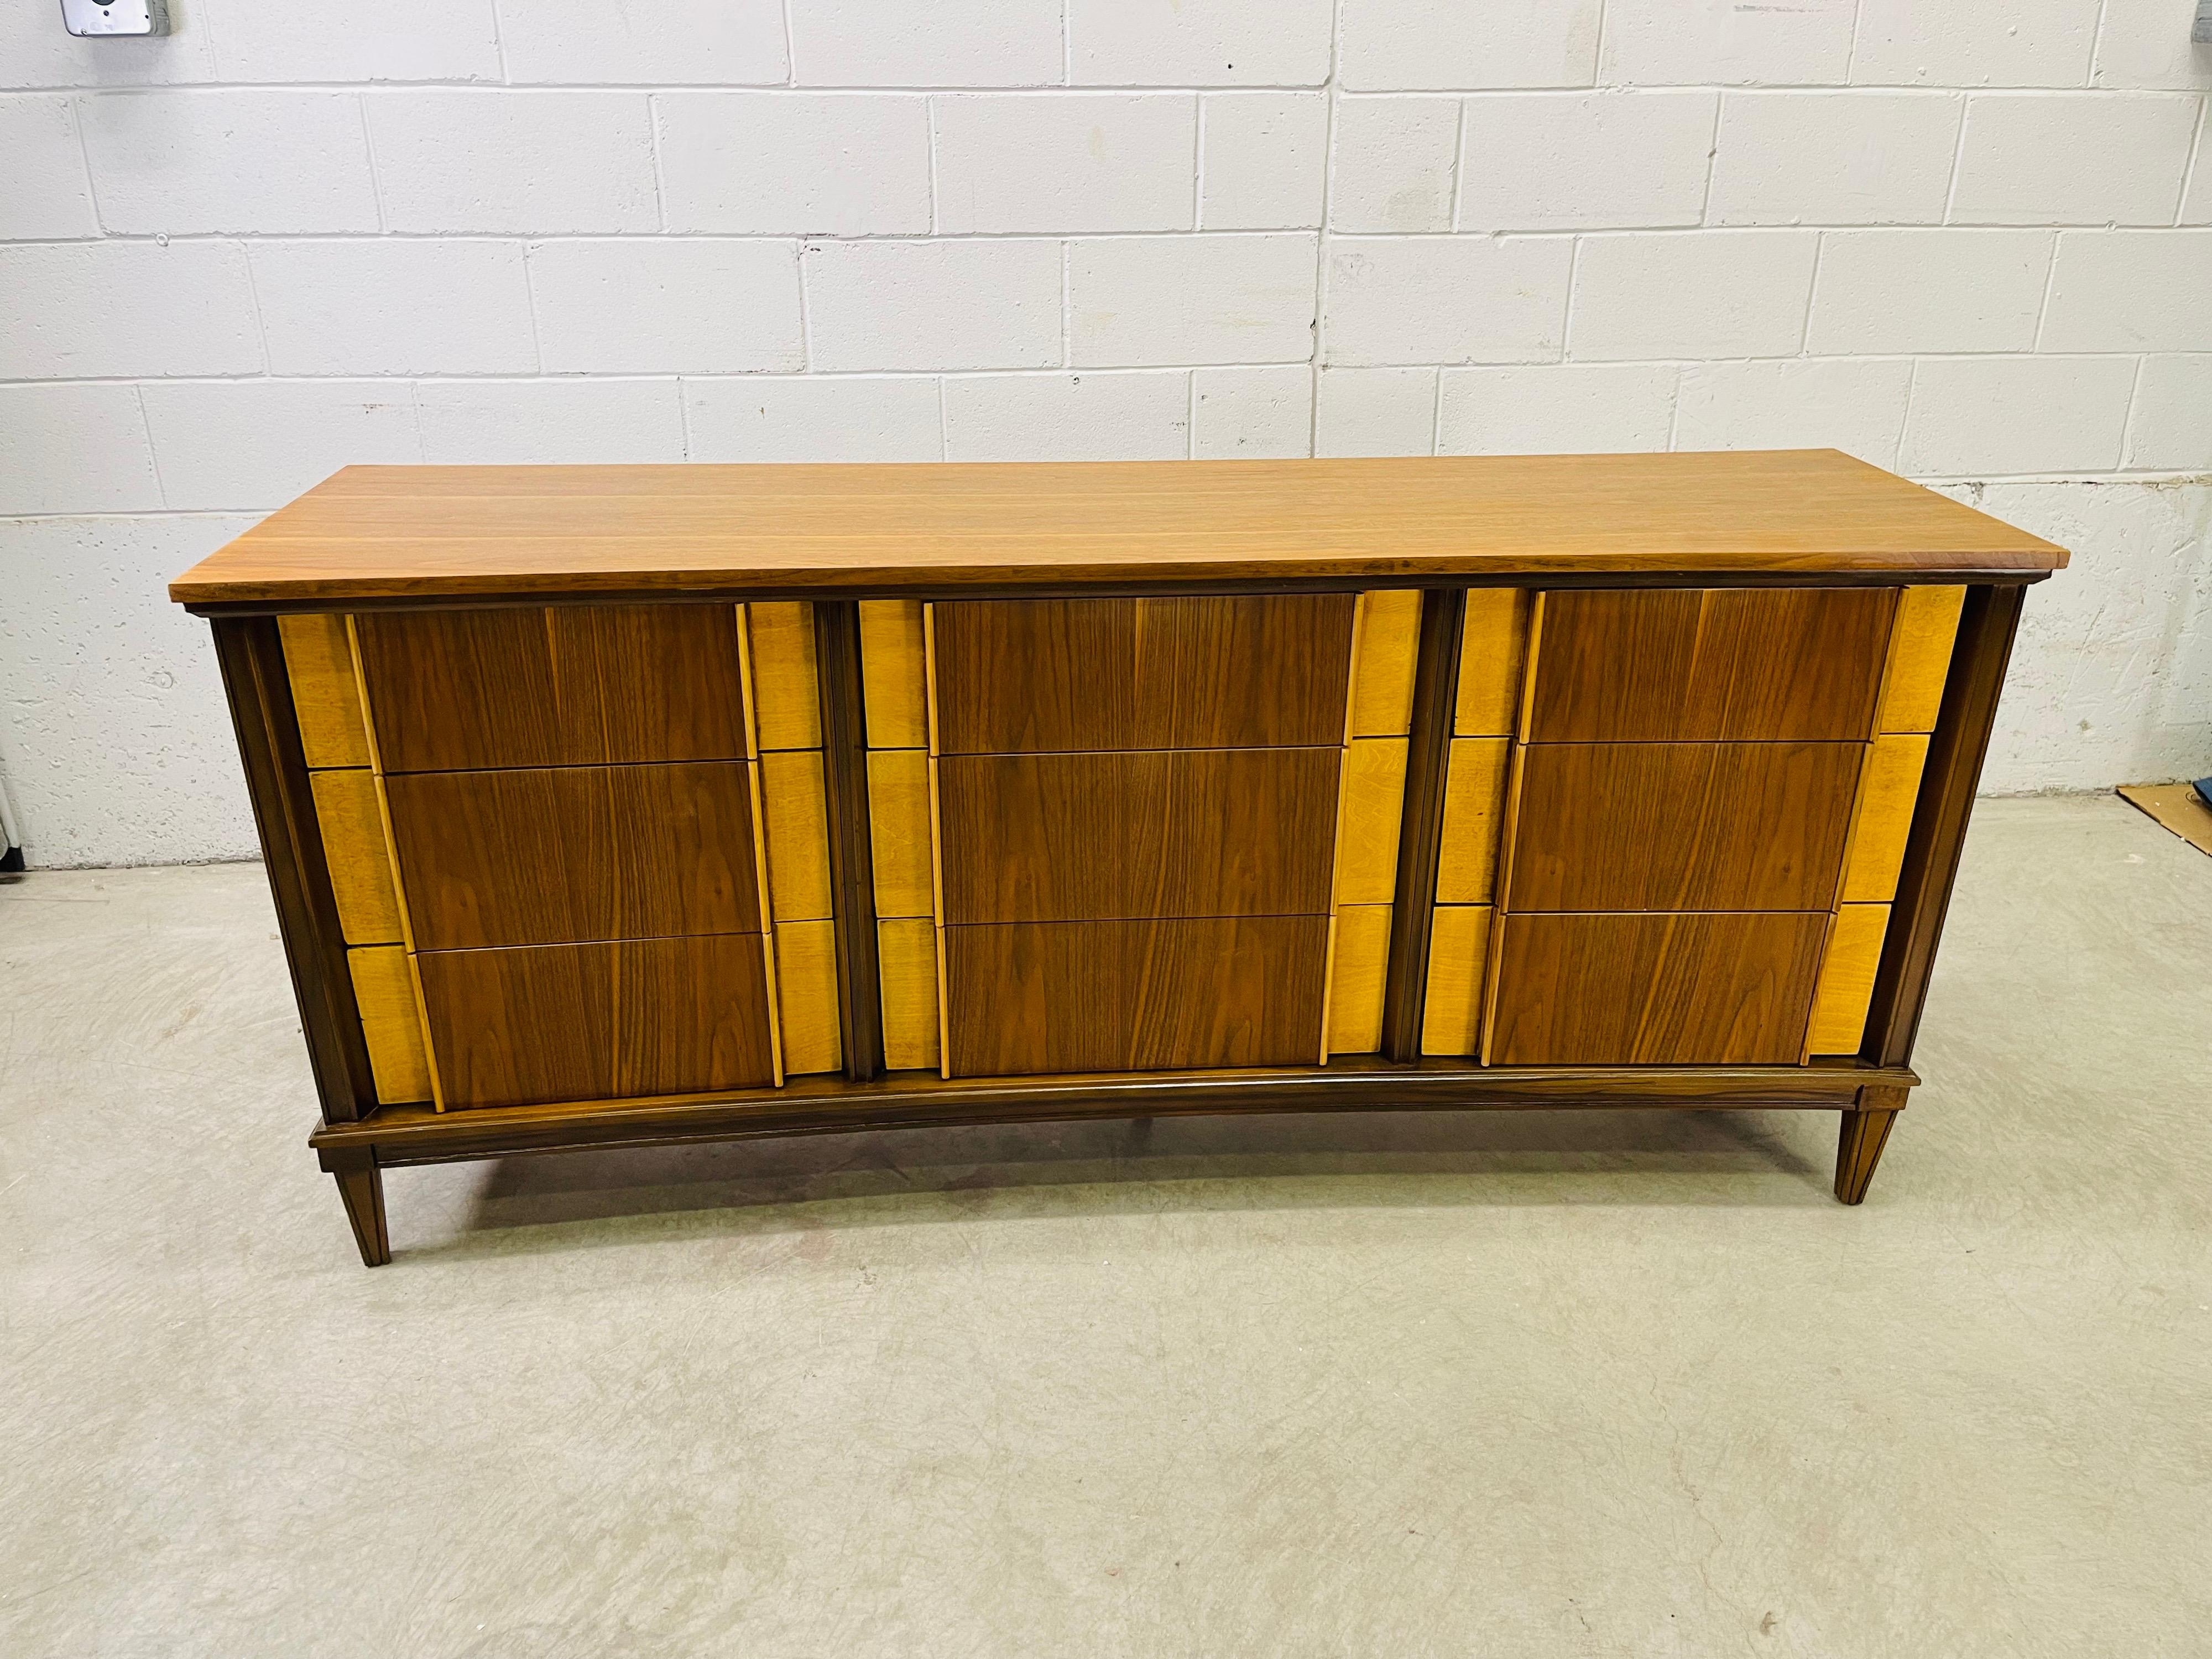 Vintage 1960s curved front two tone walnut and maple wood low dresser with nine drawers. The drawers have the maple wood on the sides. The drawers are 4-6.5”H. Great curved design. Newly refinished condition. No marks.